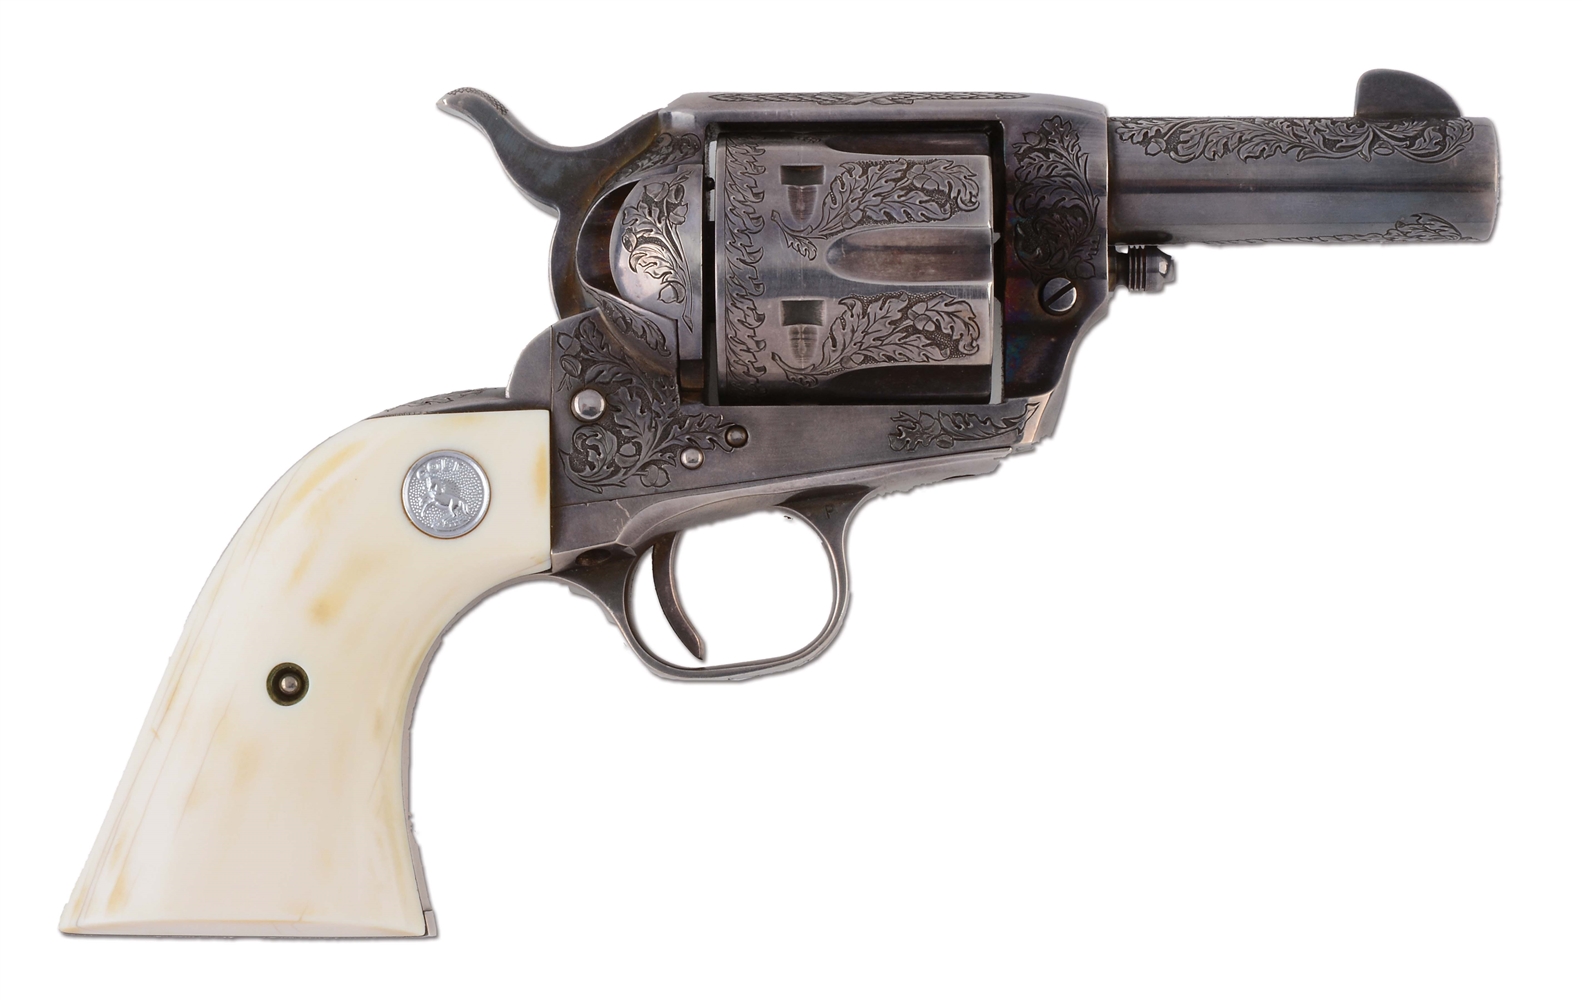 (C) HOWARD DOVE ENGRAVED SILVER PLATED COLT SHERIFFS SINGLE ACTION ARMY MODEL .45 COLT REVOLVER (1960).